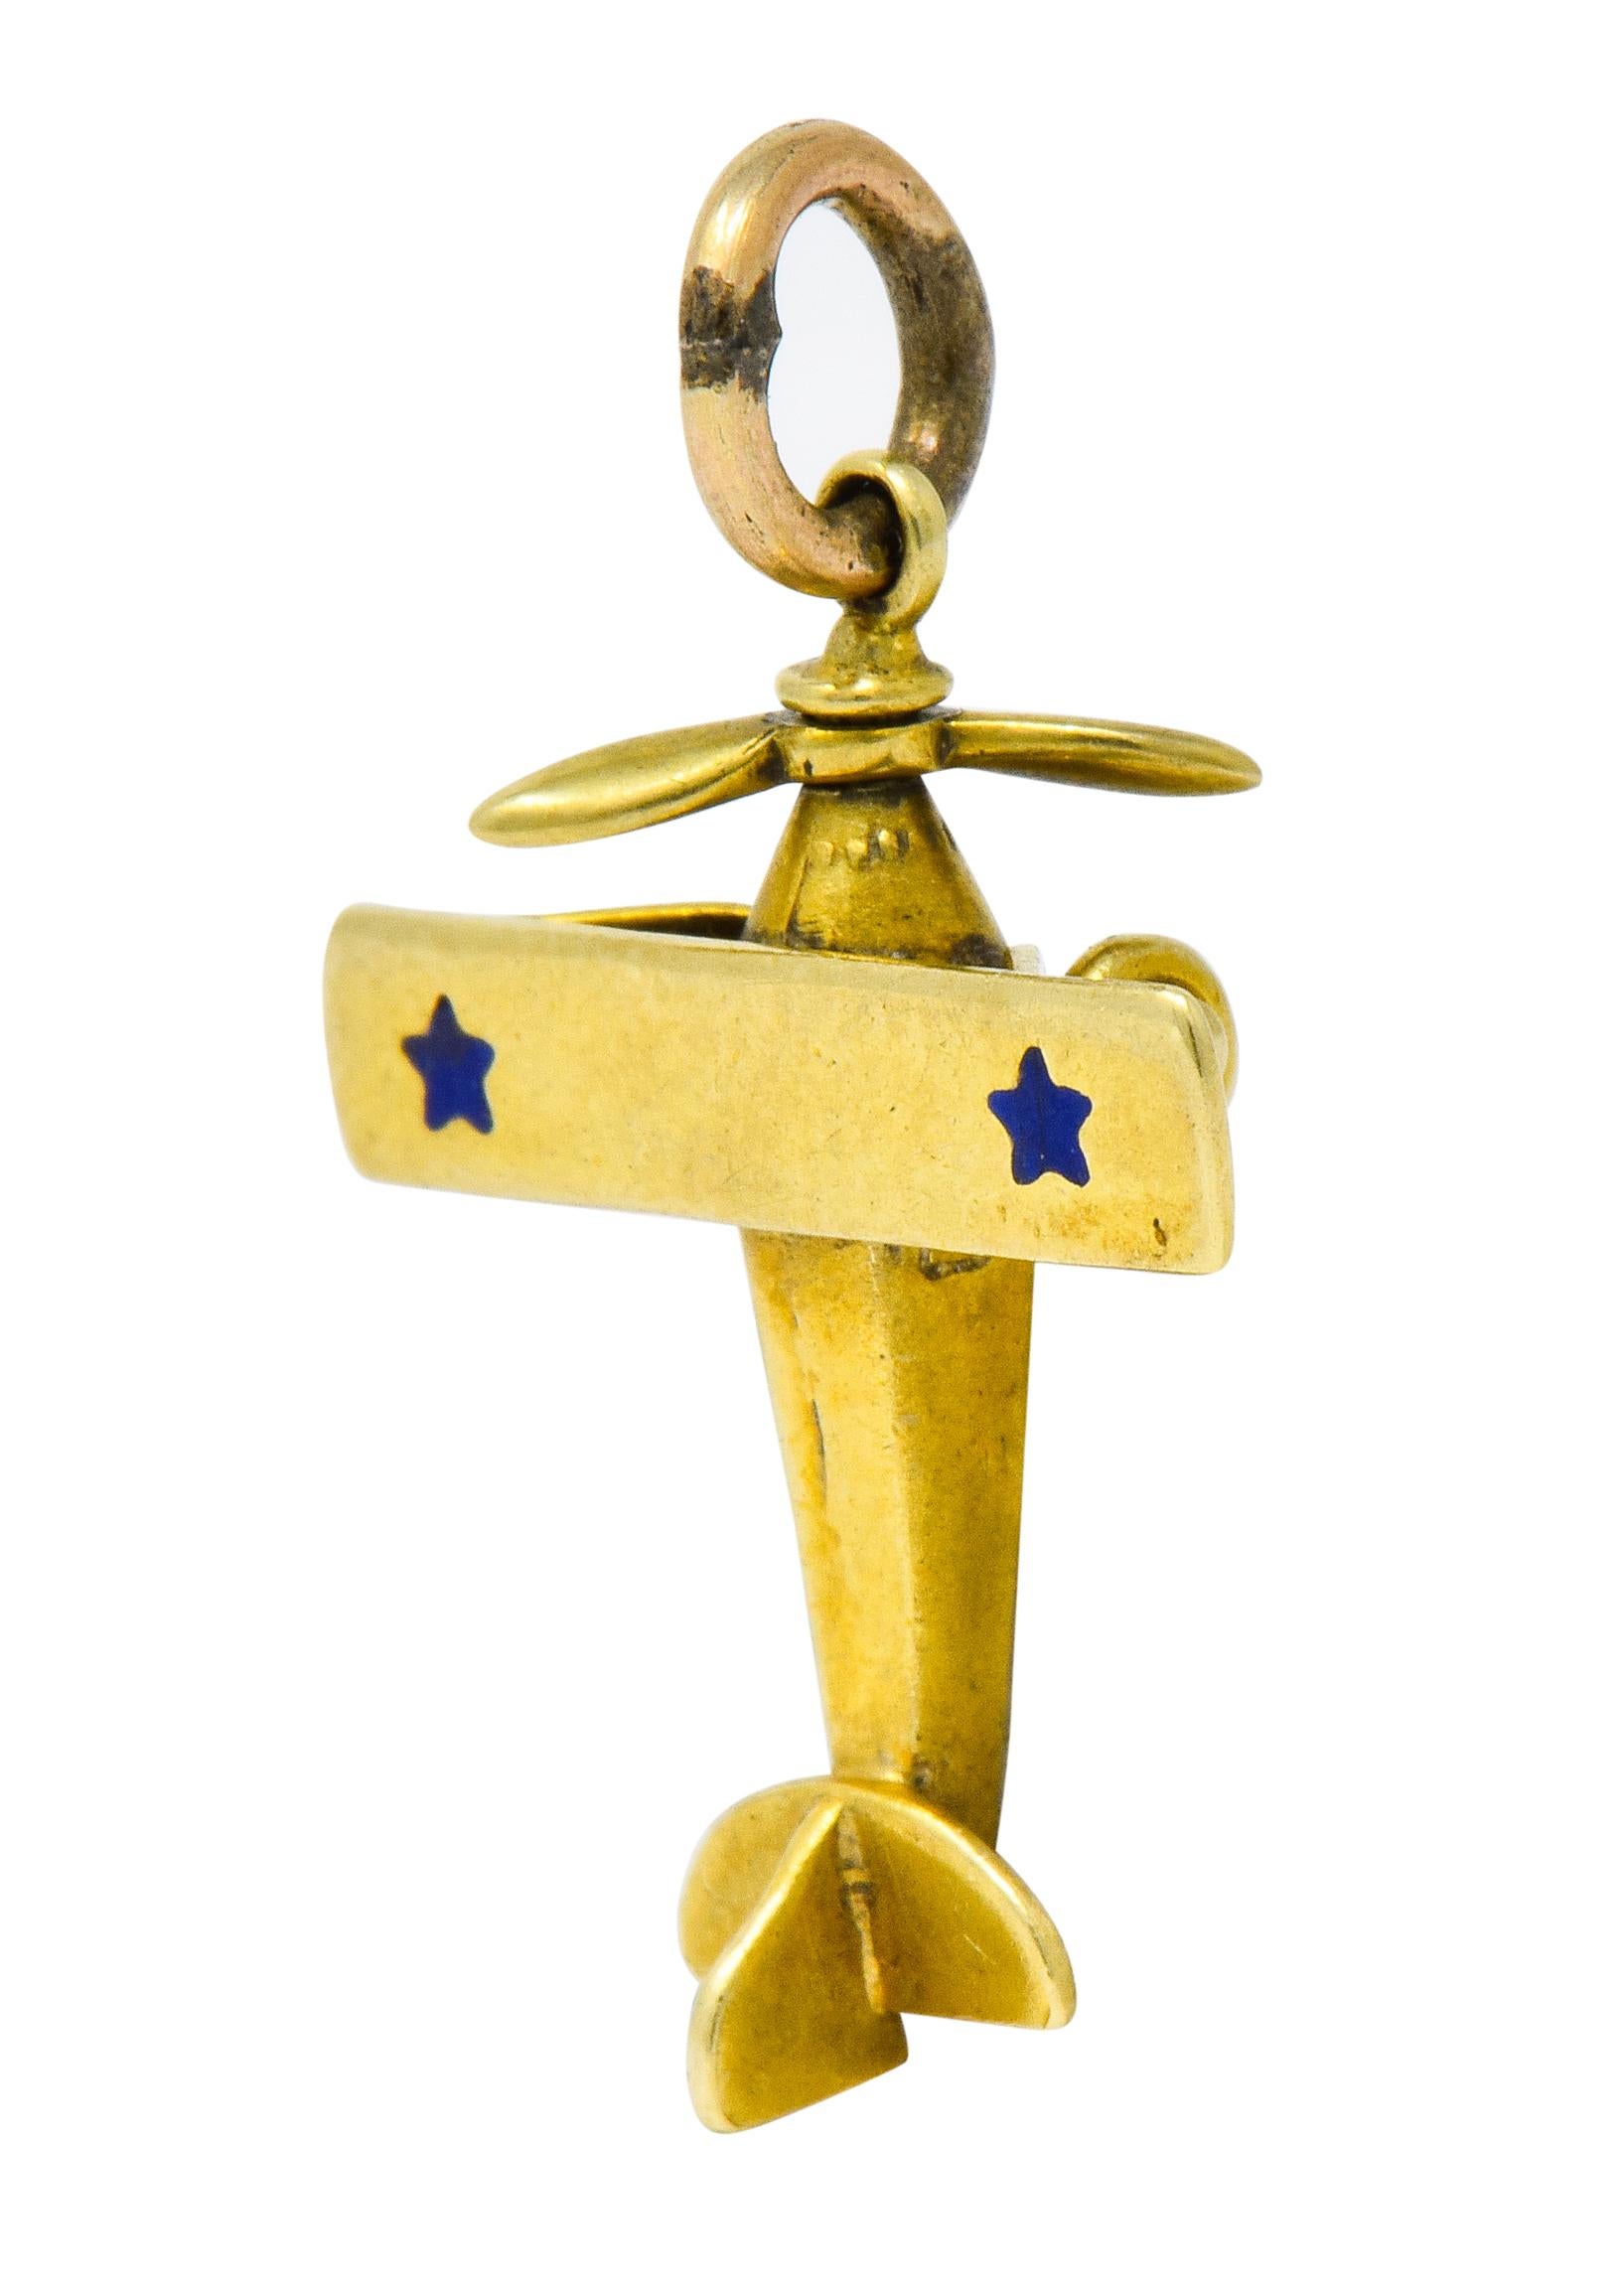 Charm designed as a whimsical plane featuring an articulated propeller

With wide rectangular wings decorated with two bright blue enamel stars exhibiting no loss; consistent with age, wear, and use

Completed by jump ring bale

With maker's mark